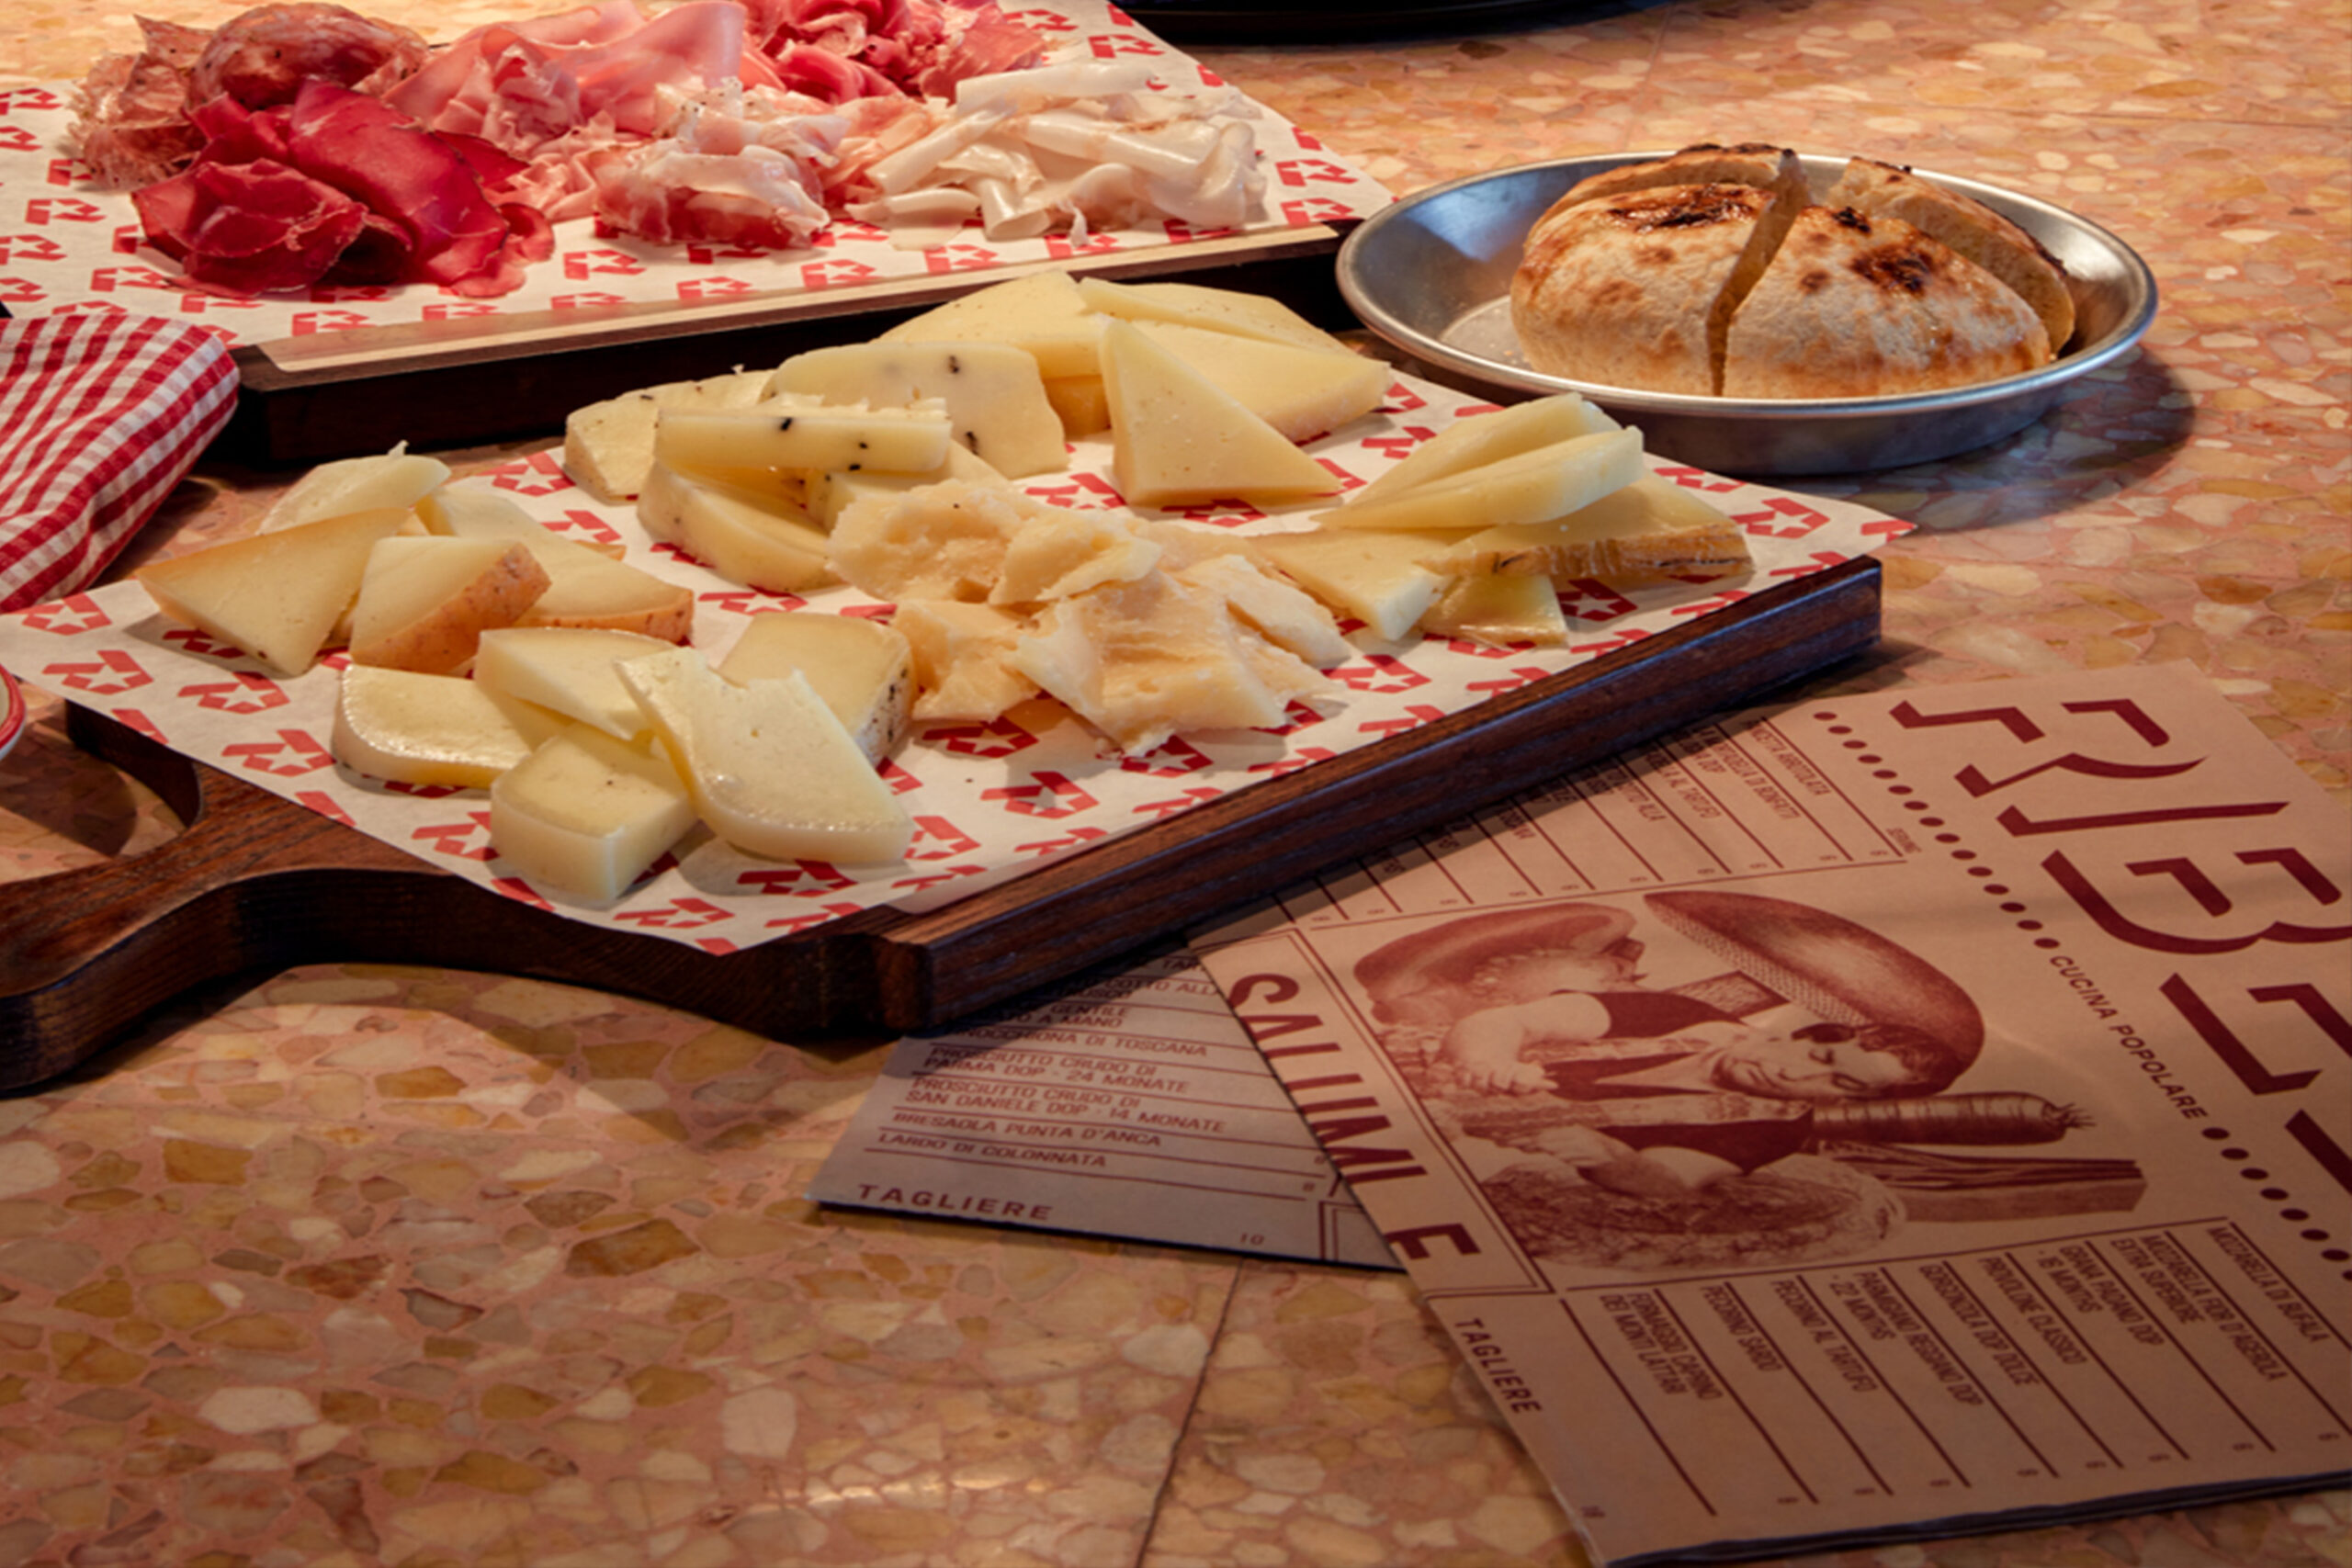 An assortement of different meat cuts and cheeses, as well as bread on different plates